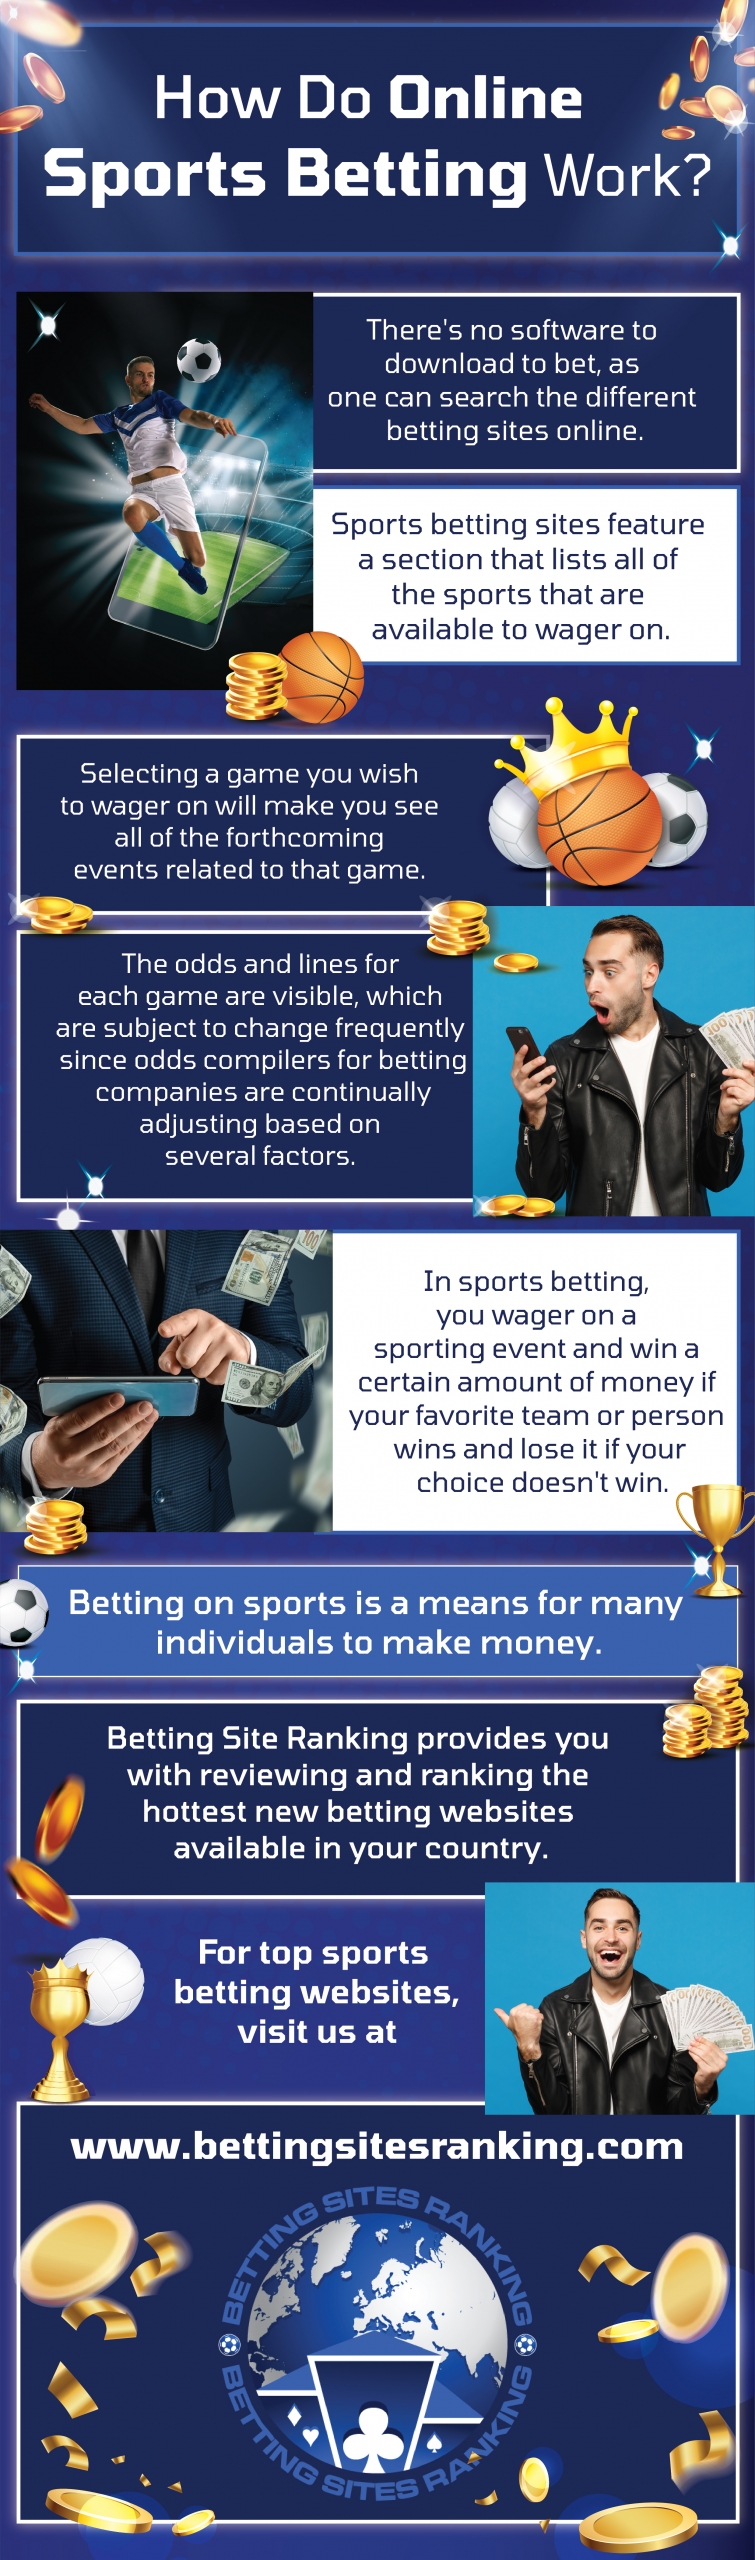 How-Do-Online-Sports-Betting-Work